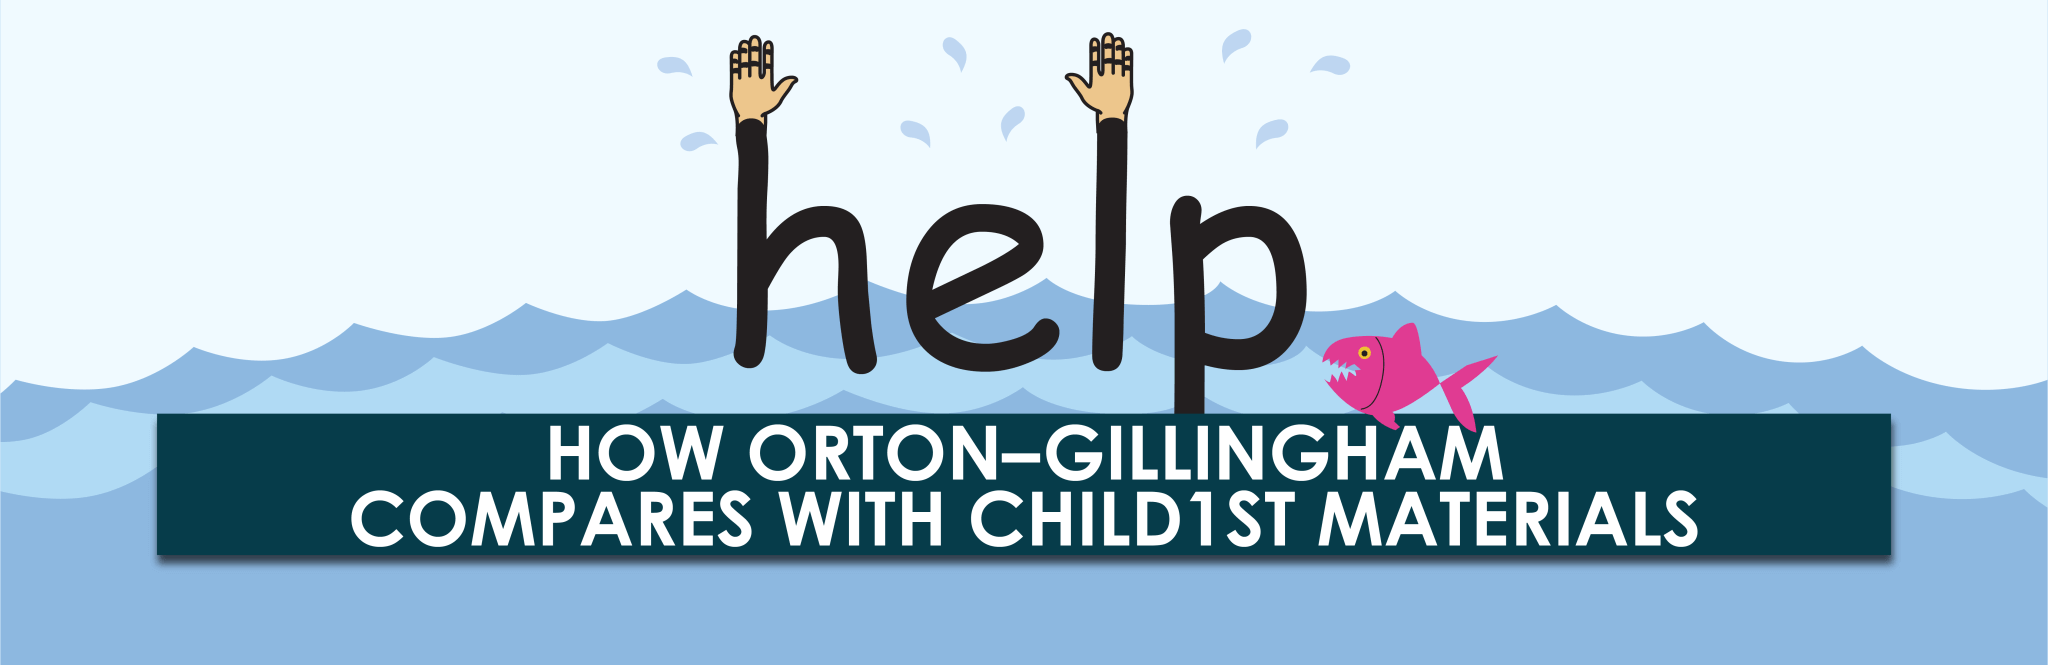 How Orton-Gillingham Compares with Child1st Materials